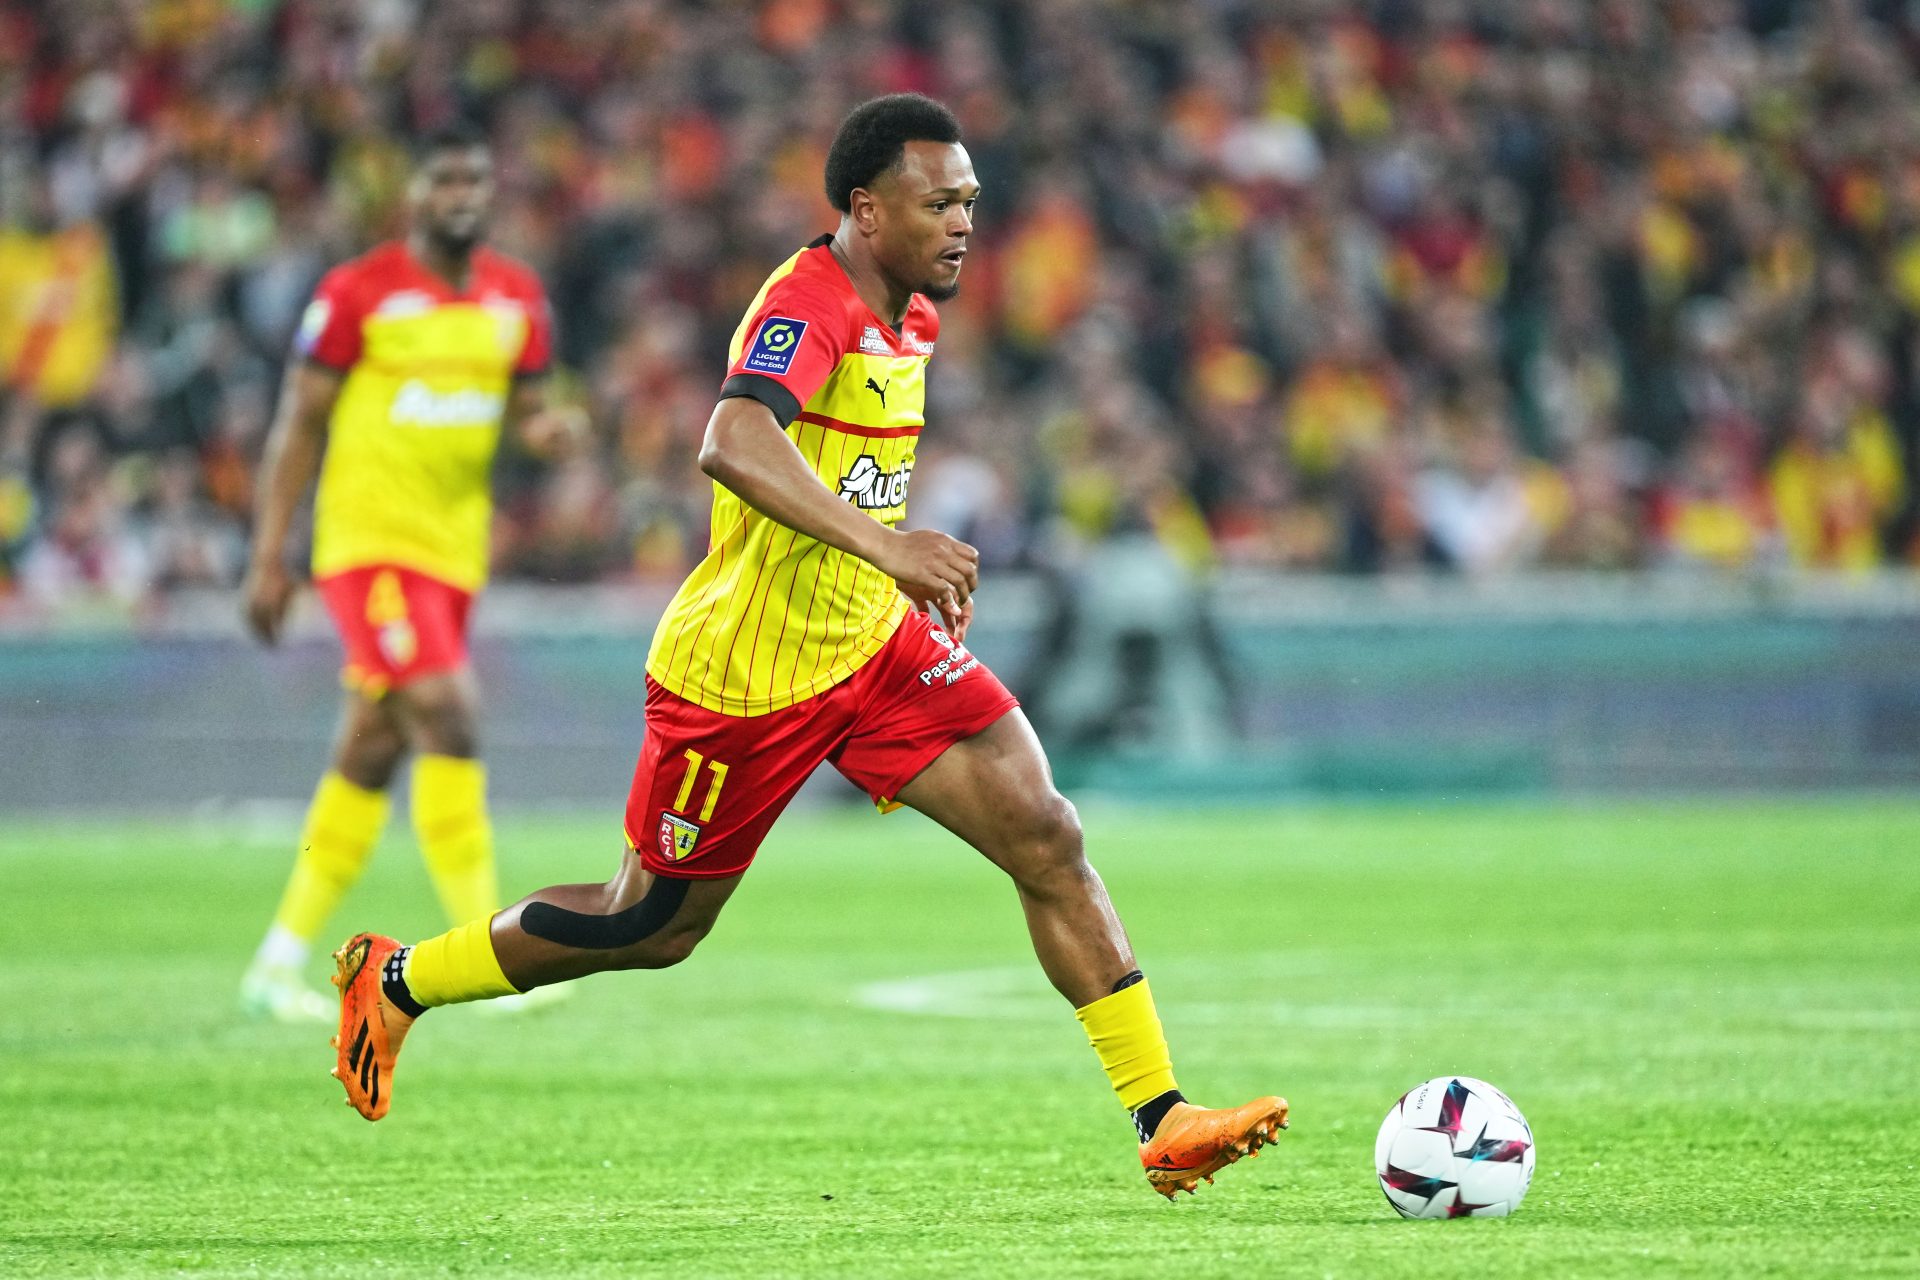 Move to RC Lens